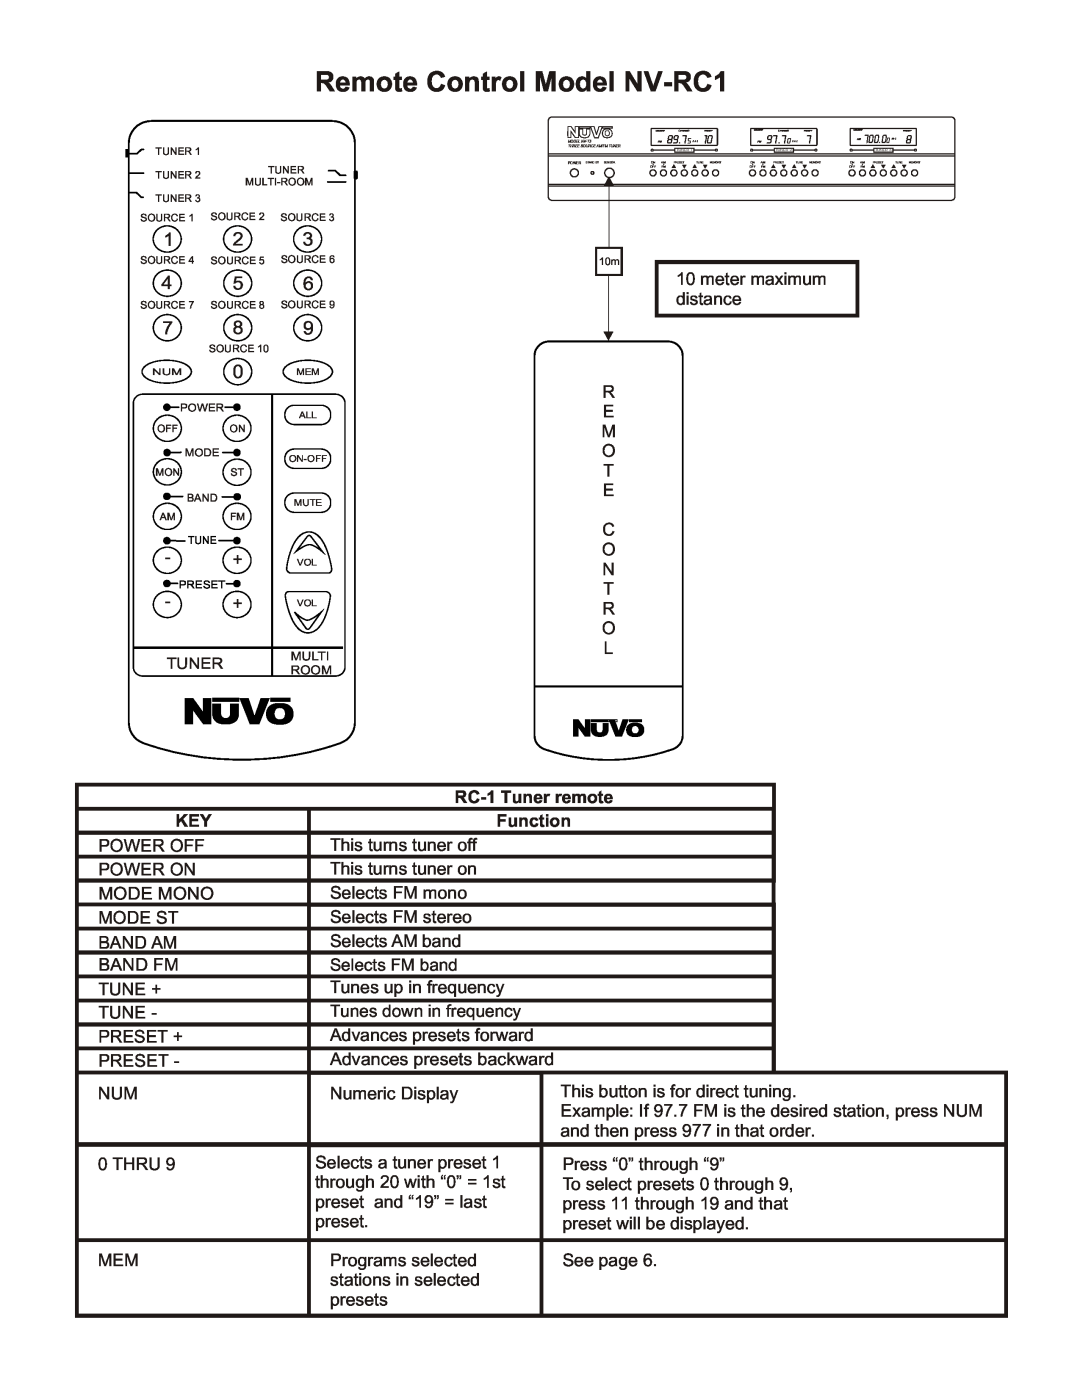 Nuvo NV-T3 owner manual Remote Control Model NV-RC1, RC-1Tuner remote, Function 